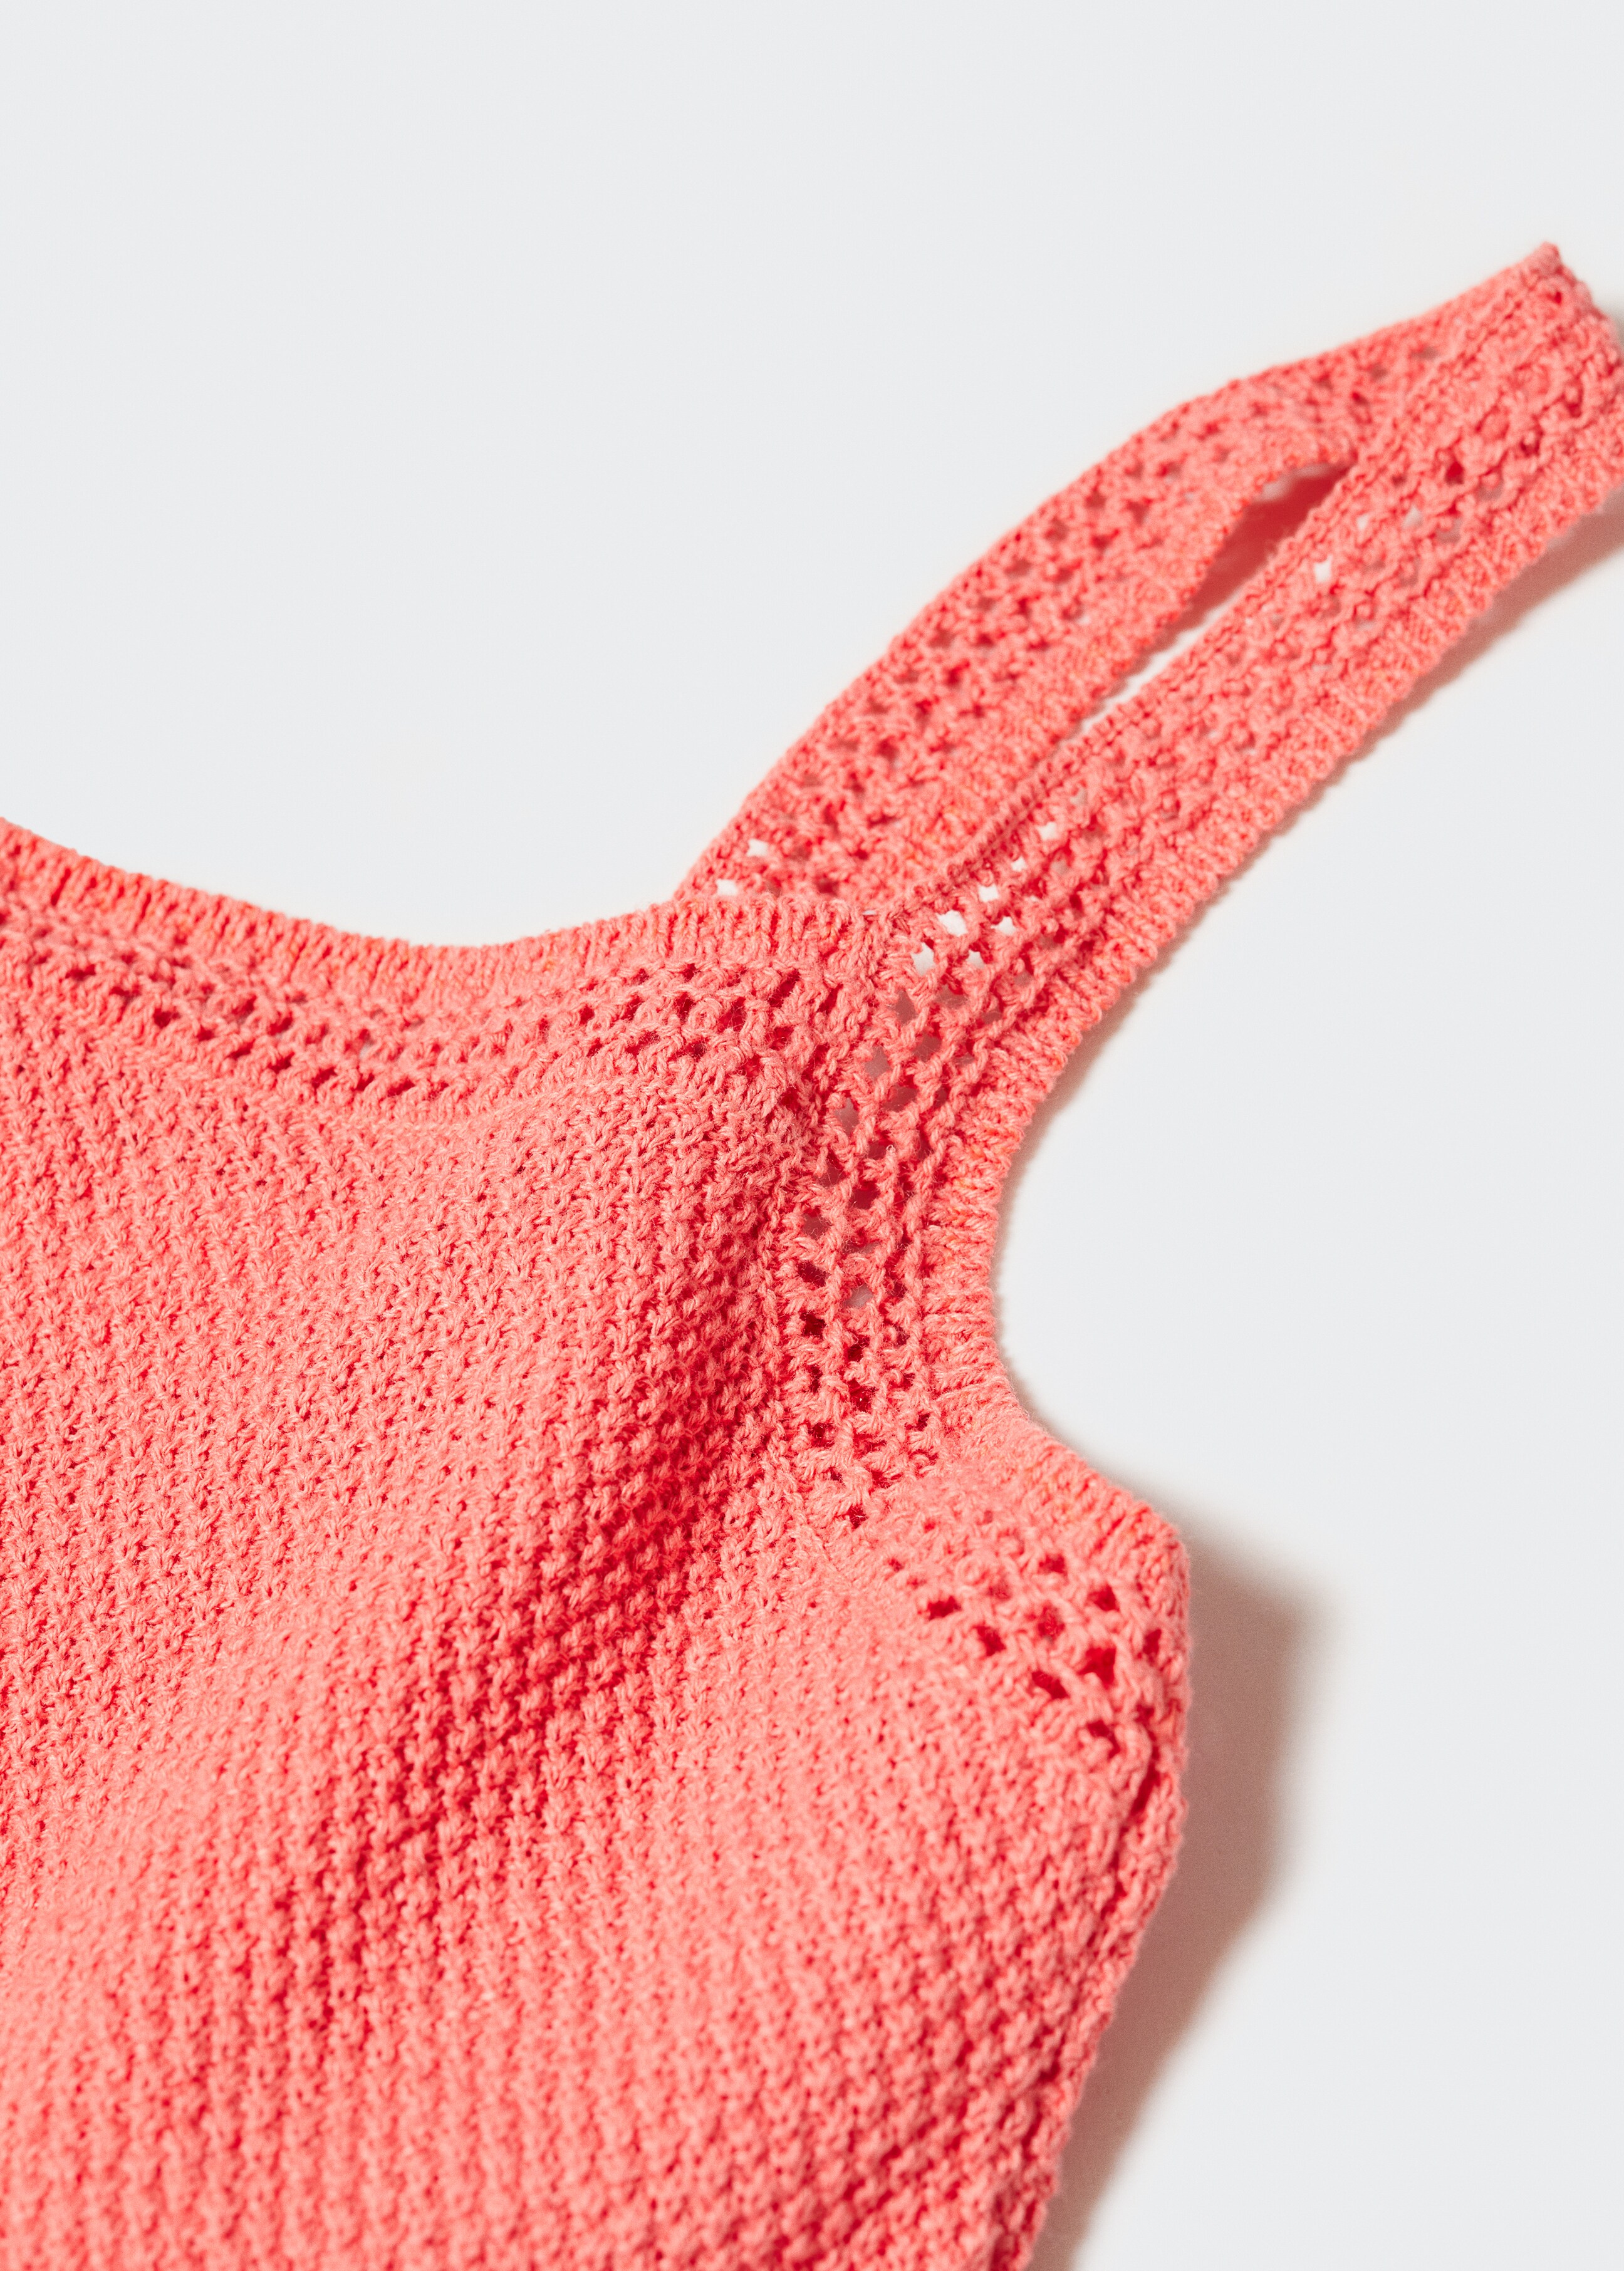 Crochet top - Details of the article 8